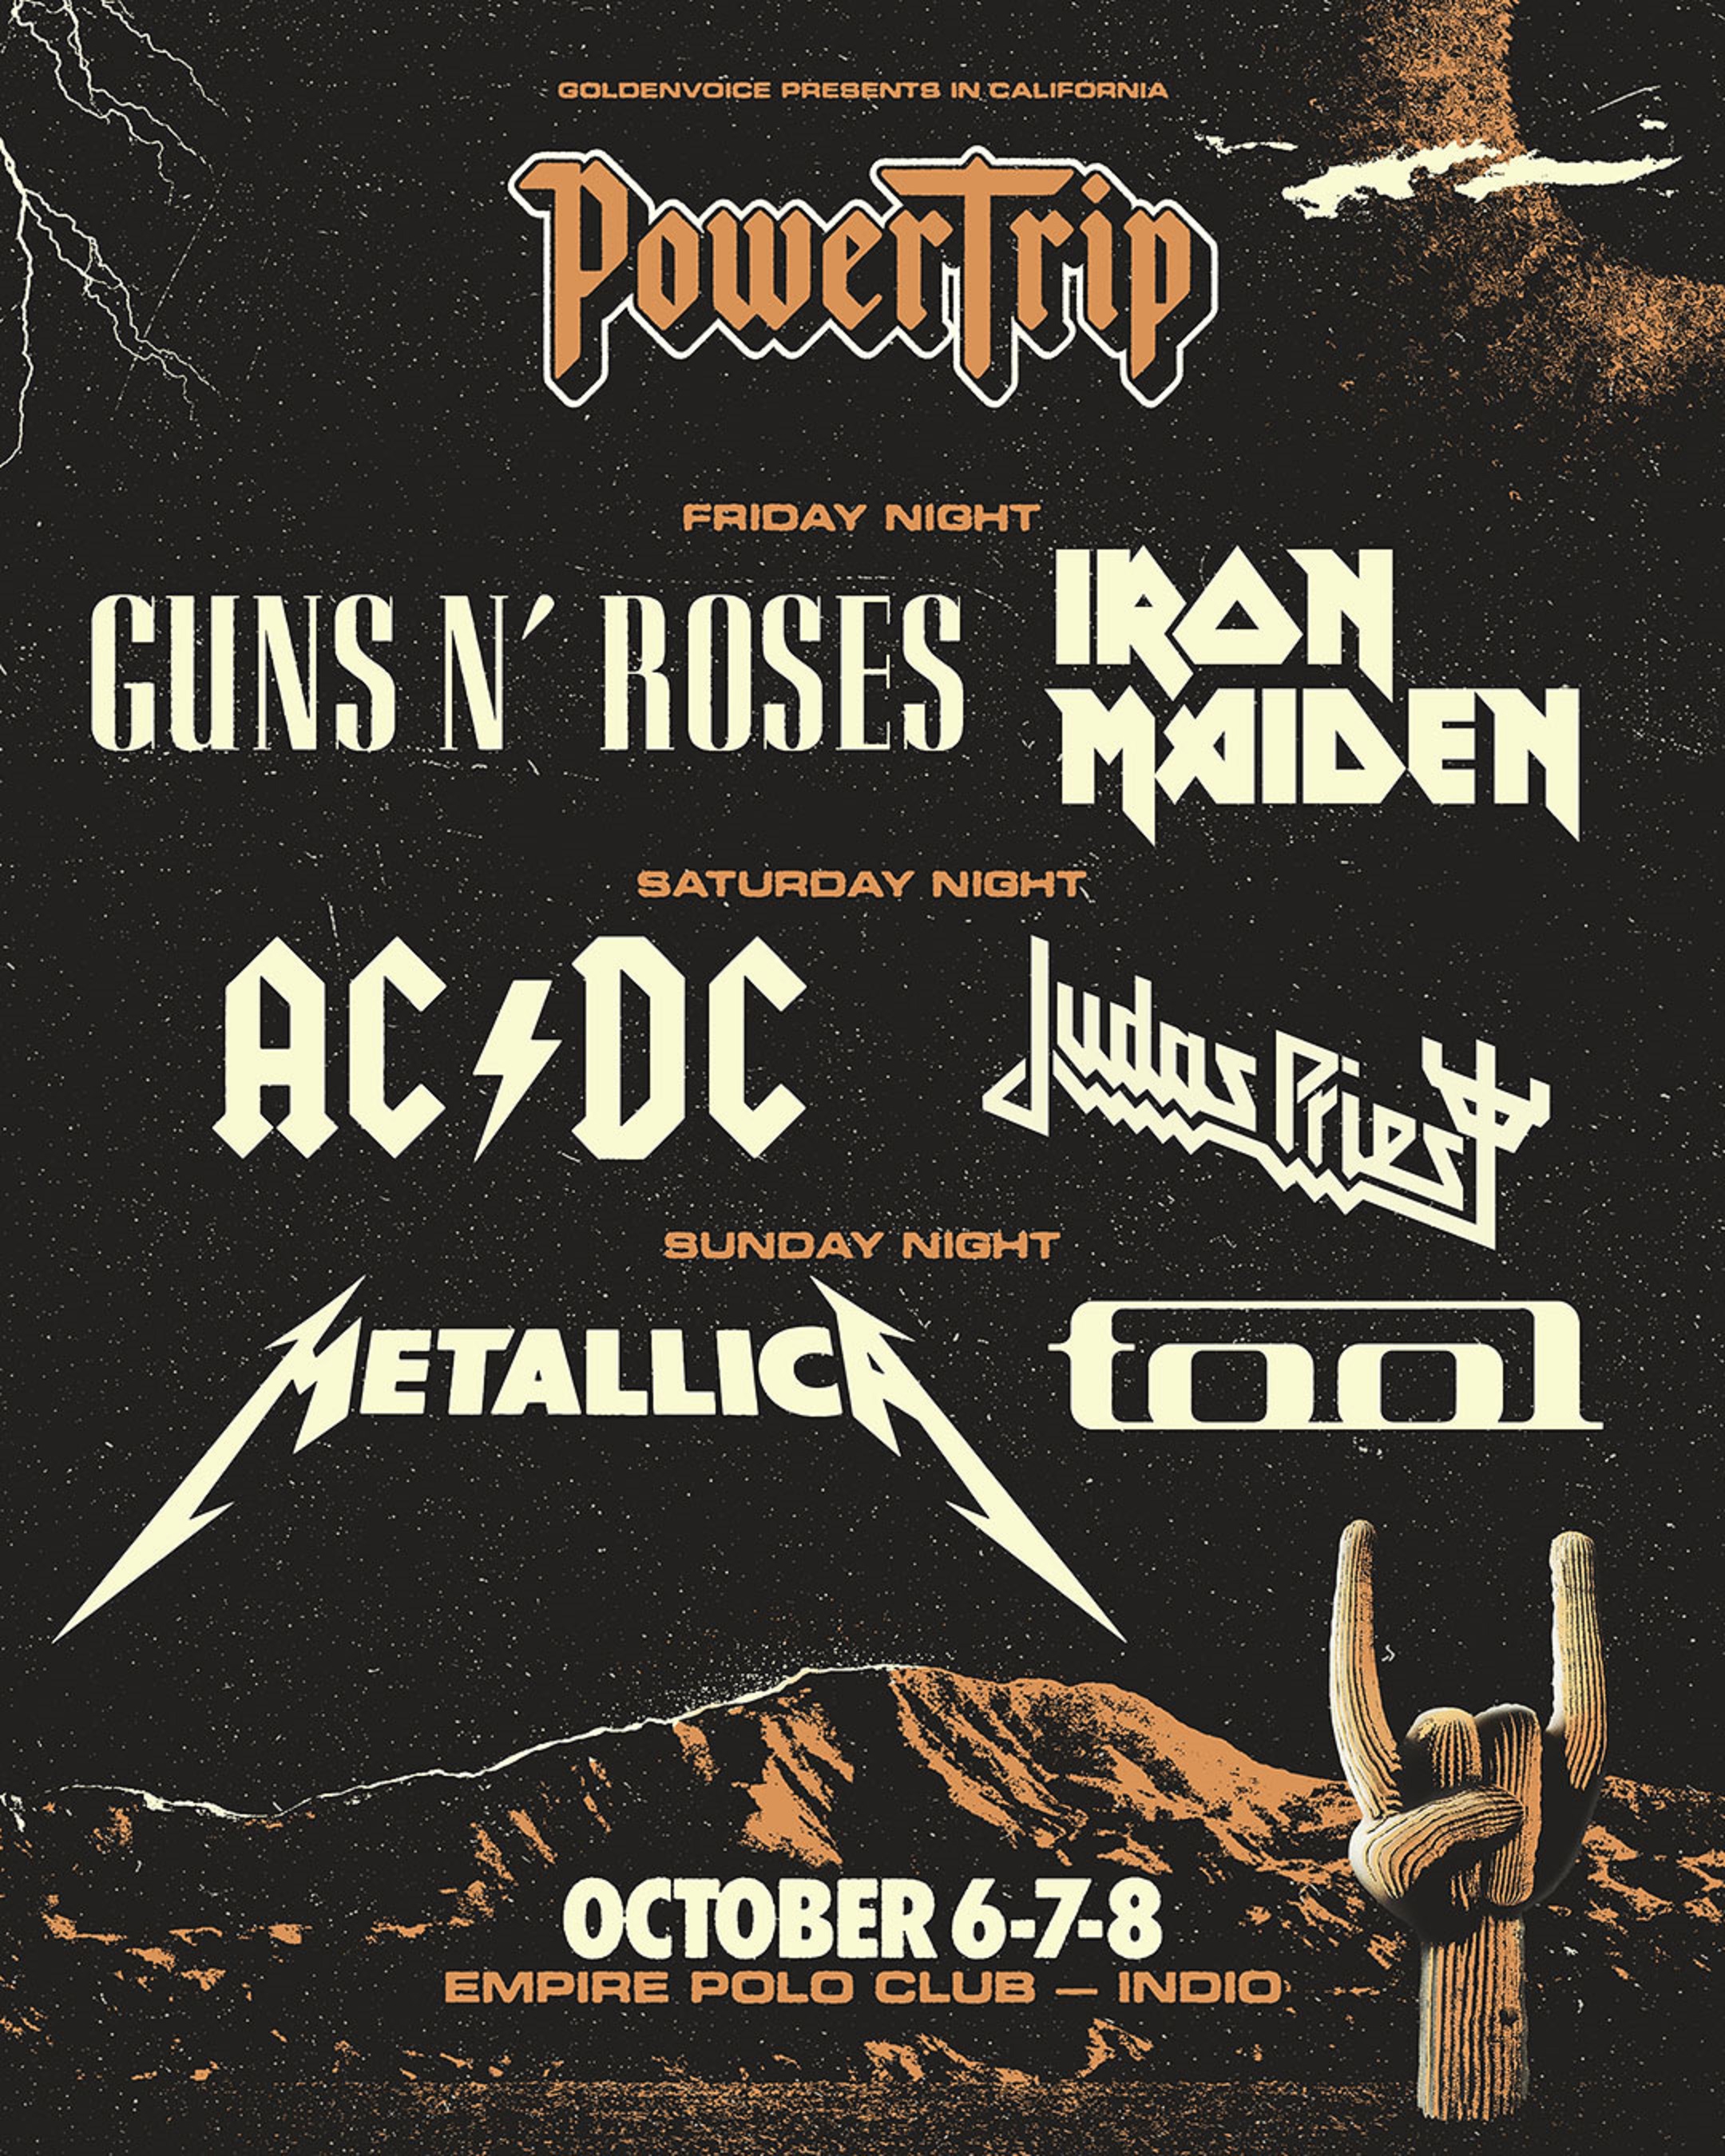 Goldenvoice Announces Schedule For POWER TRIP: October 6, 7 And 8 At The Empire Polo Club In Indio, CA